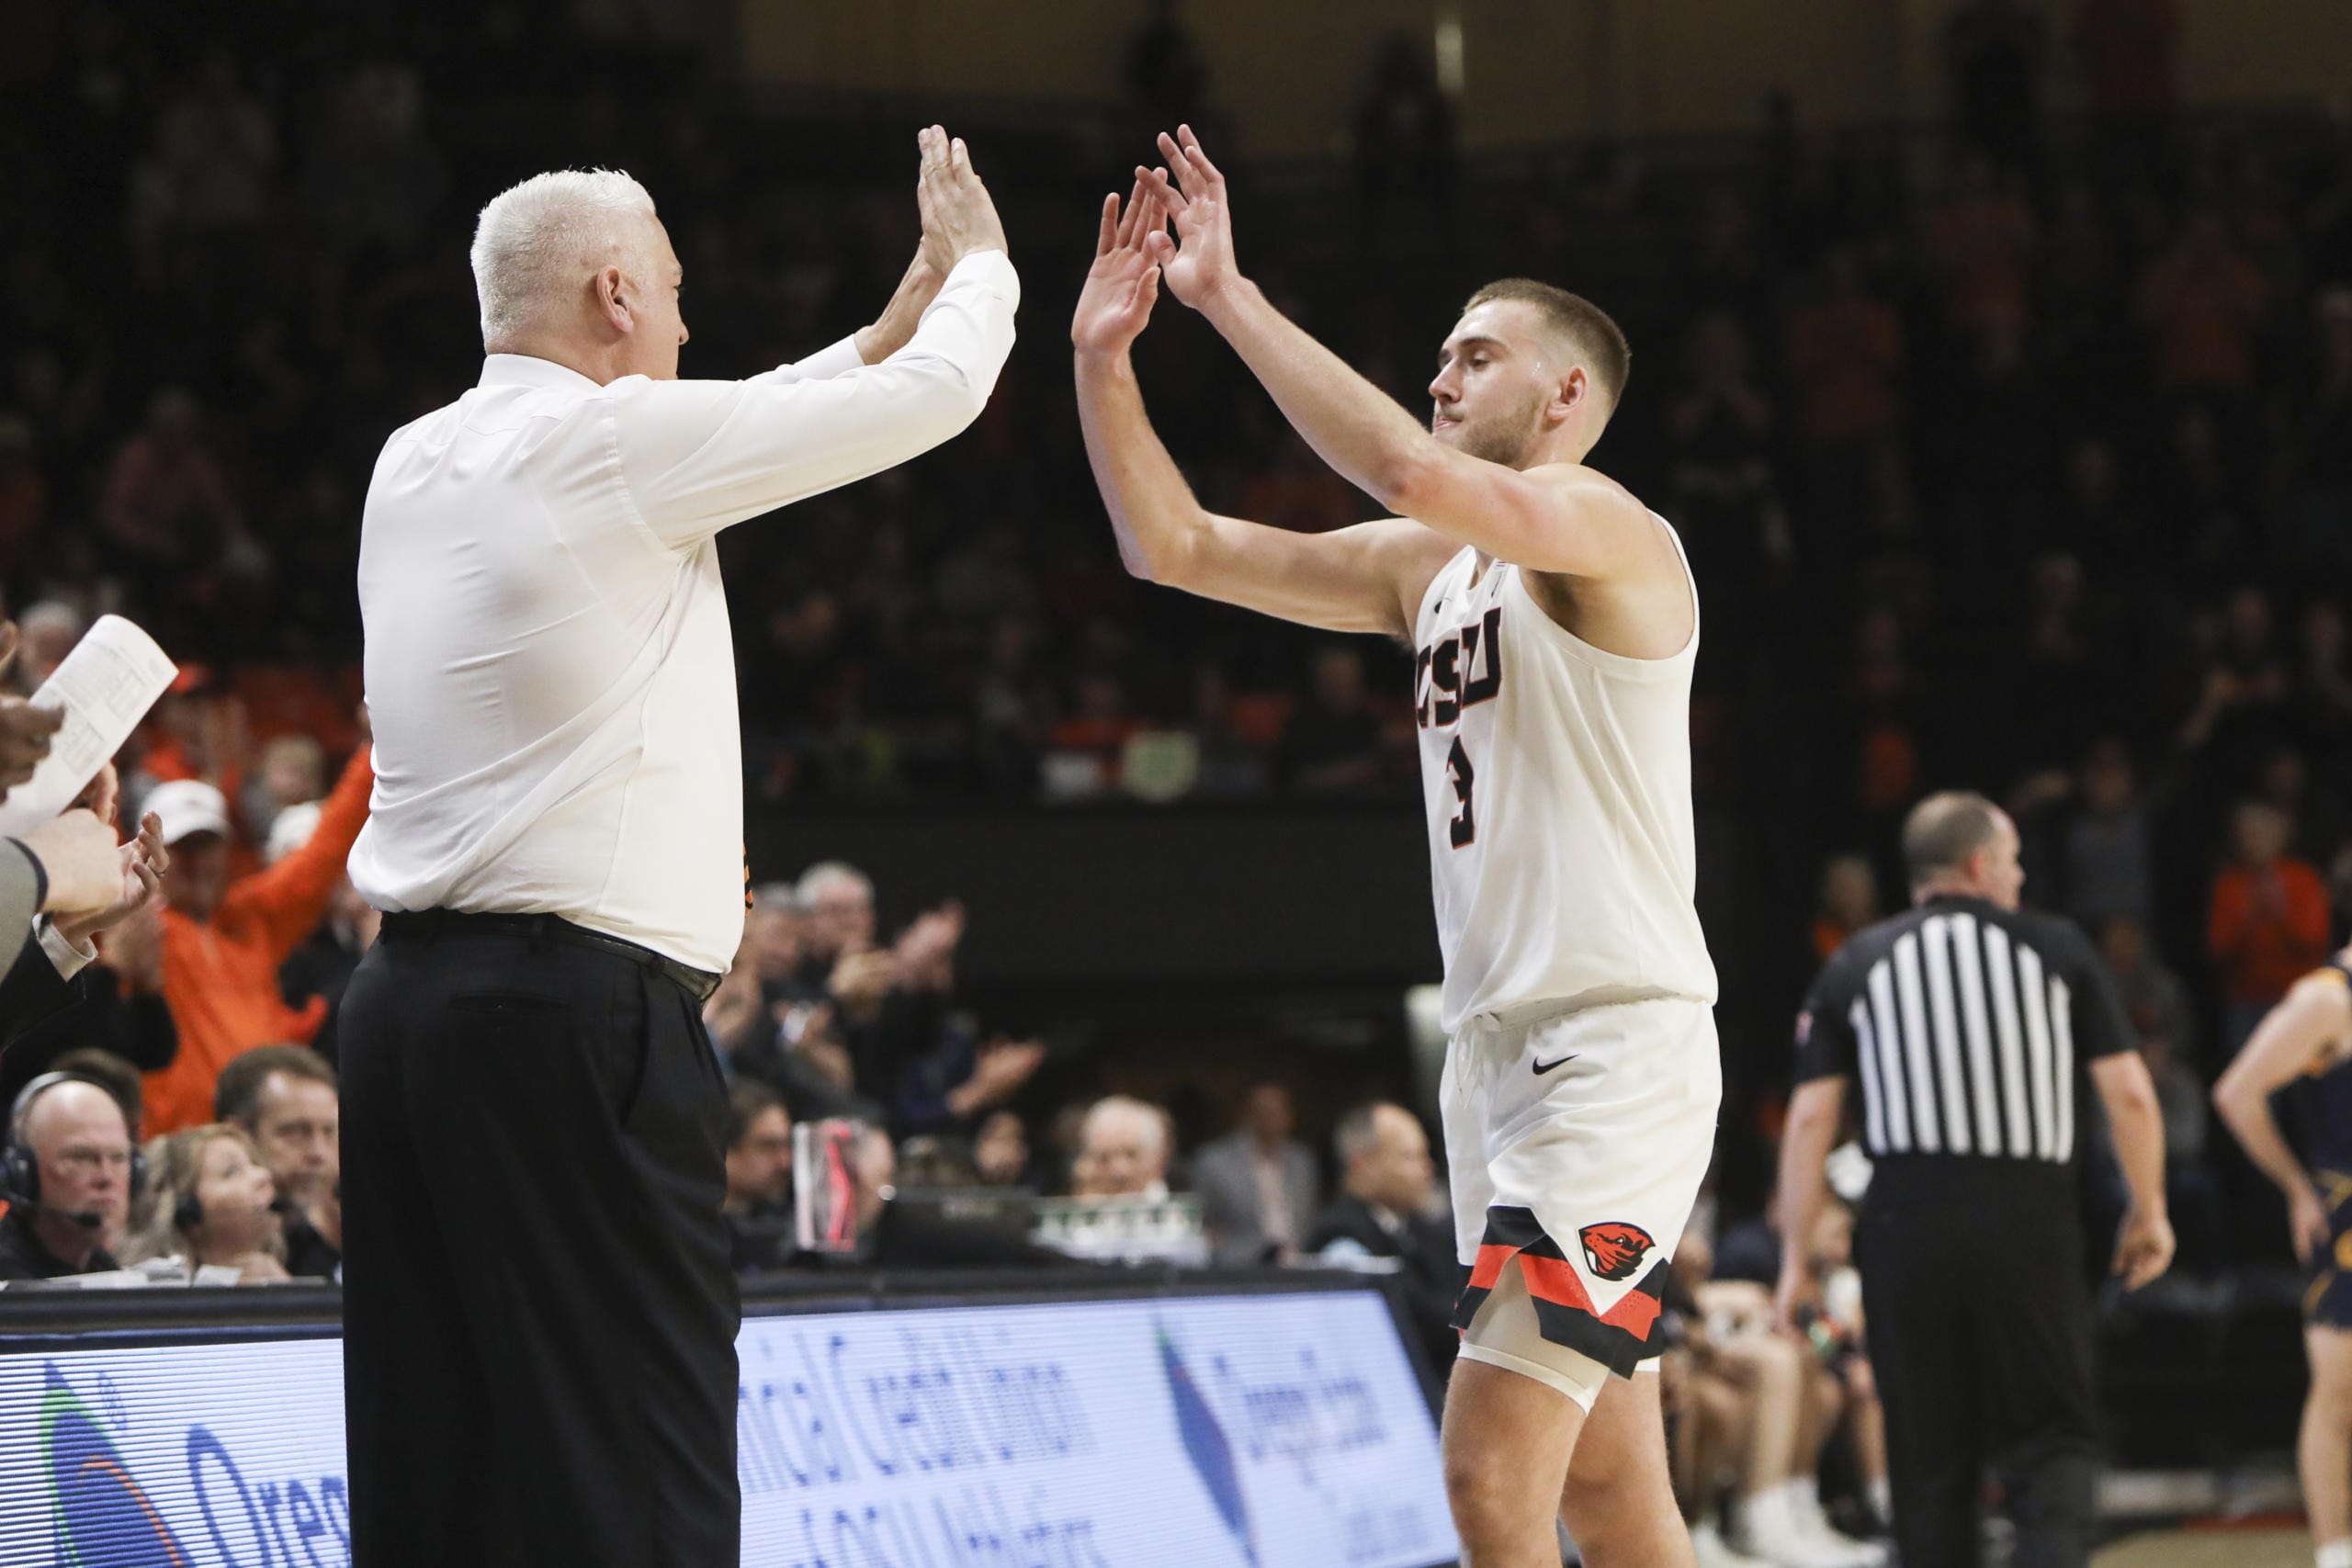 Oregon State's Tres Tinkle (3) high-fives his father, Oregon State head coach Wayne Tinkle, as Tres is subbed out in the last minute of his final home NCAA college basketball game, against California, in Corvallis, Ore., Saturday, March 7, 2020.